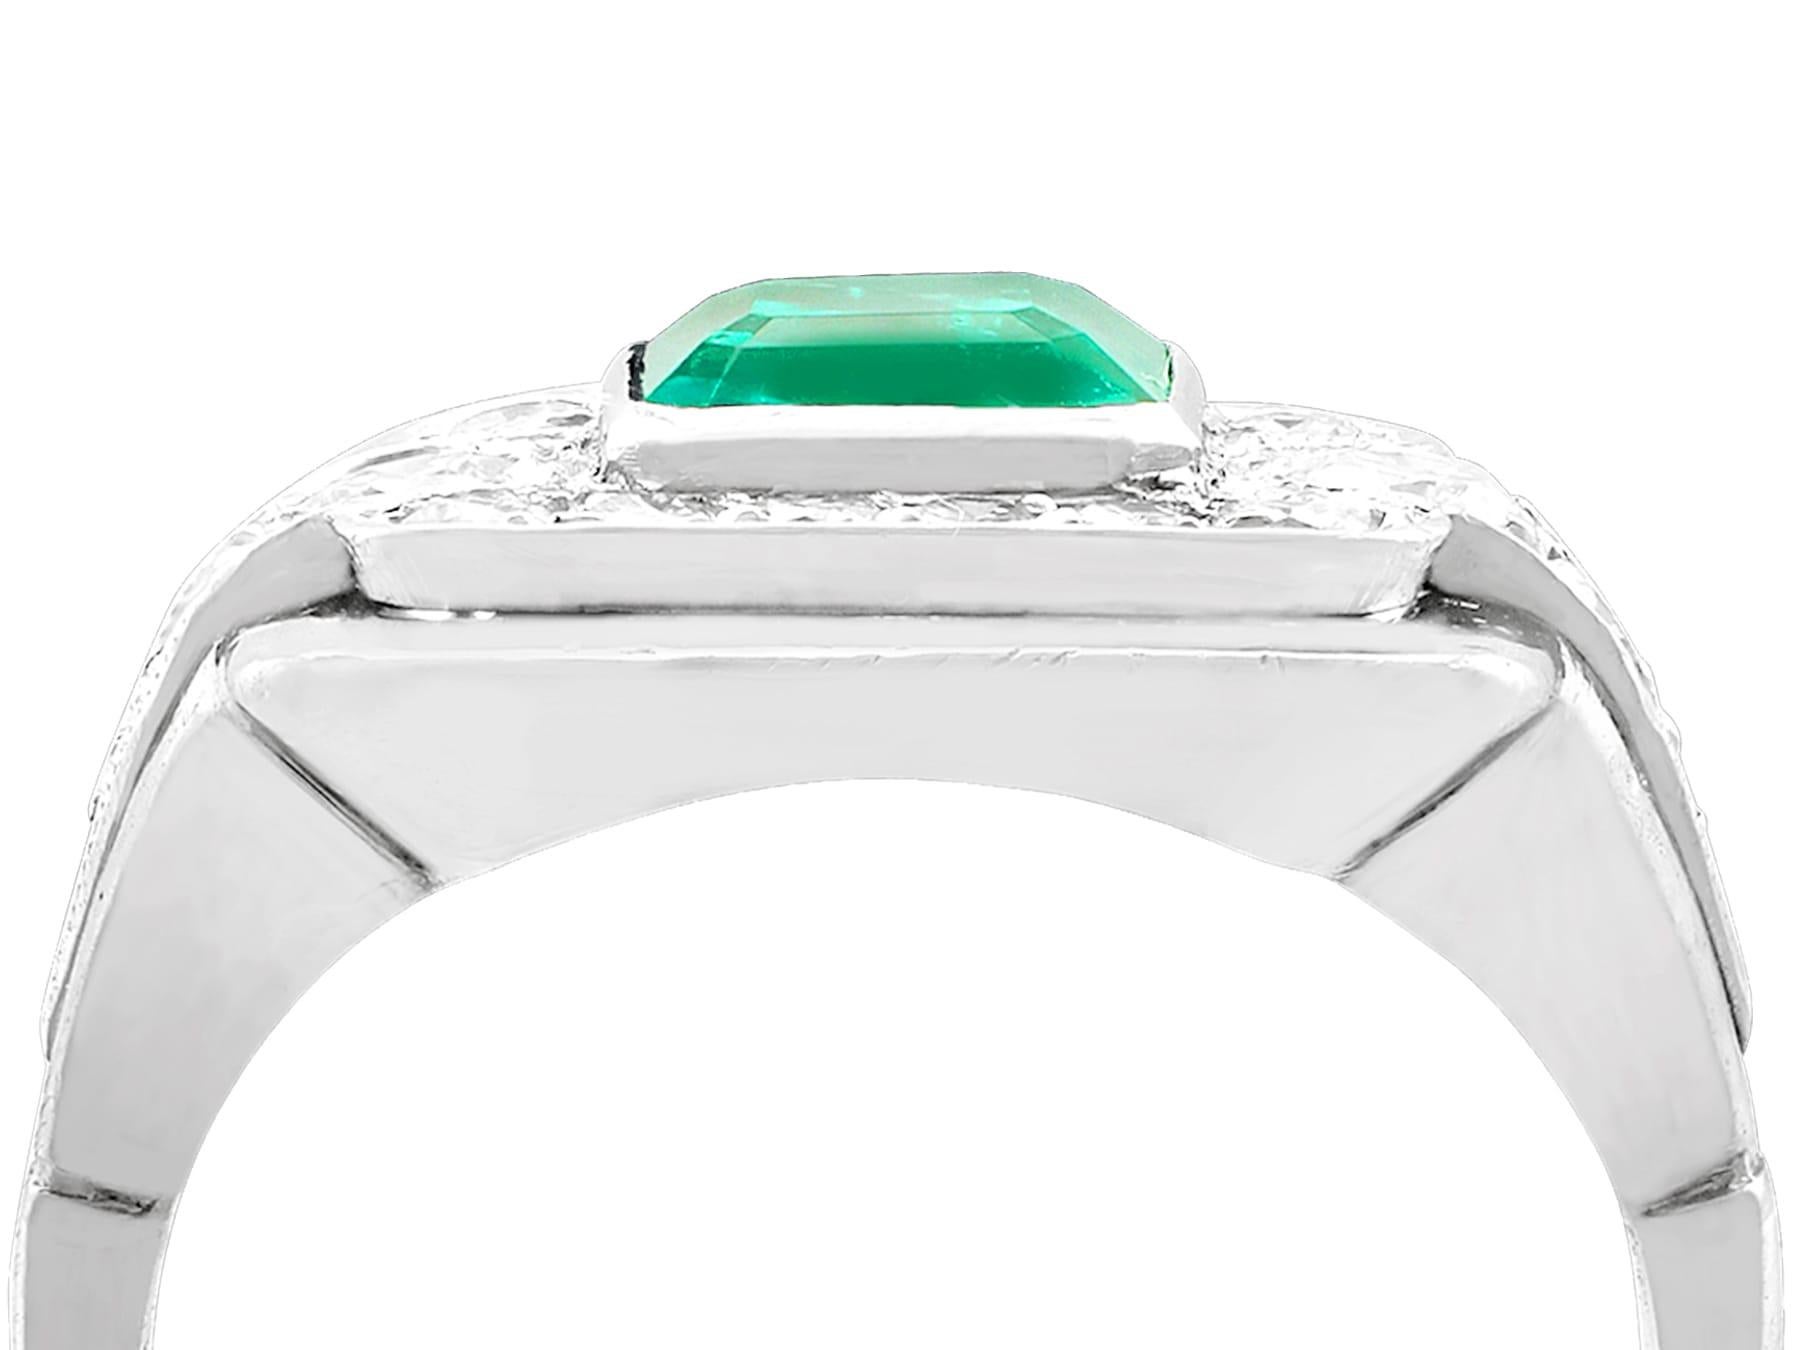 An impressive vintage 0.69 carat emerald and 0.52 carat diamond, platinum and 18k white gold set dress ring; part of our diverse vintage jewelry collections.

This stunning, fine and impressive vintage emerald and diamond ring has been crafted in